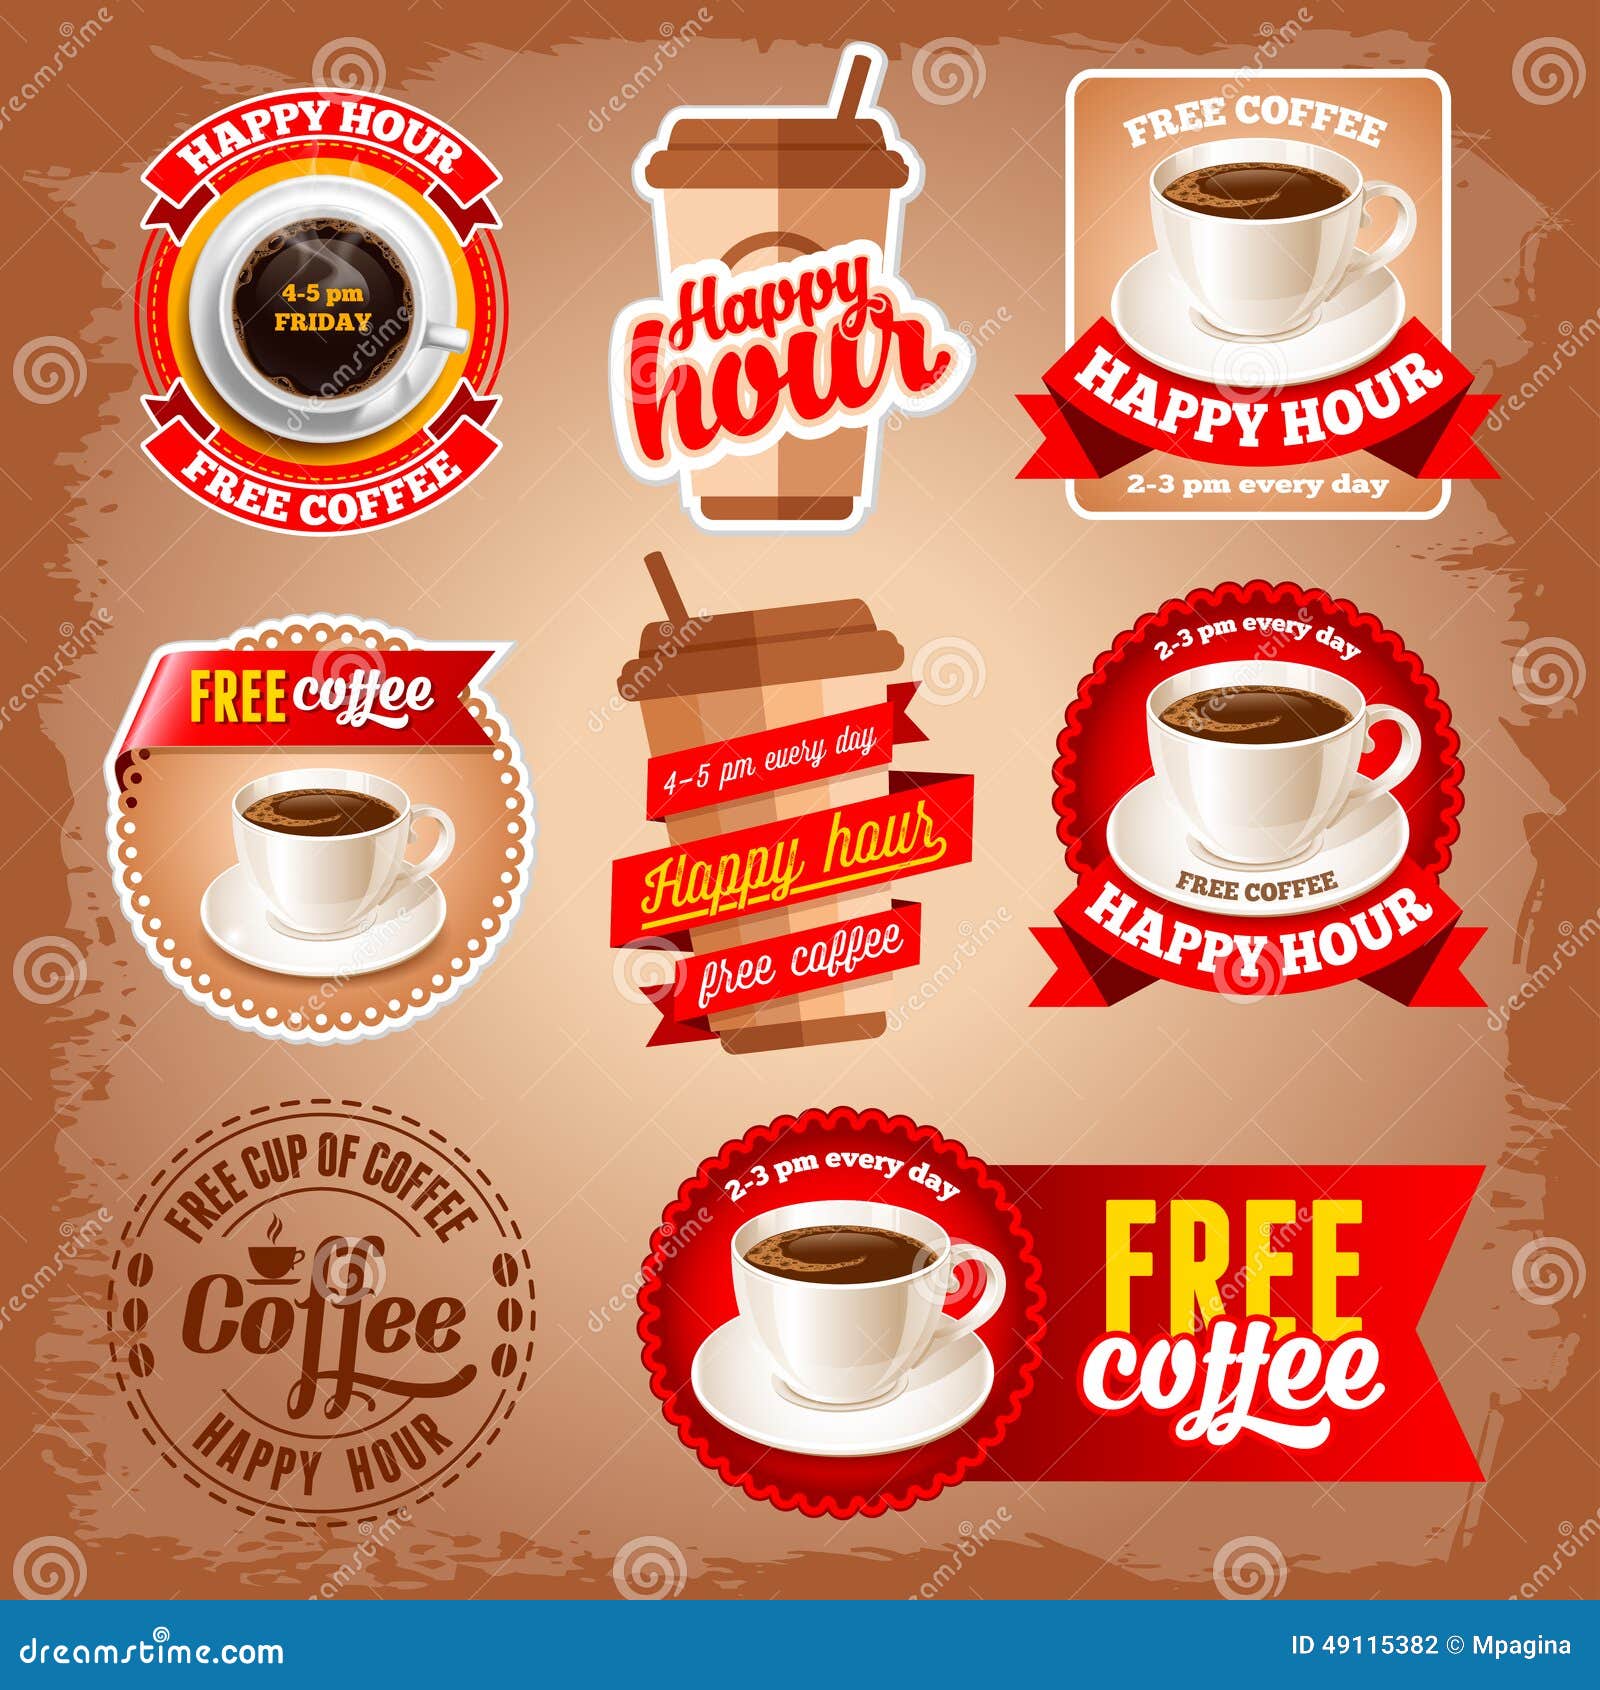 free clipart coffee hour - photo #26